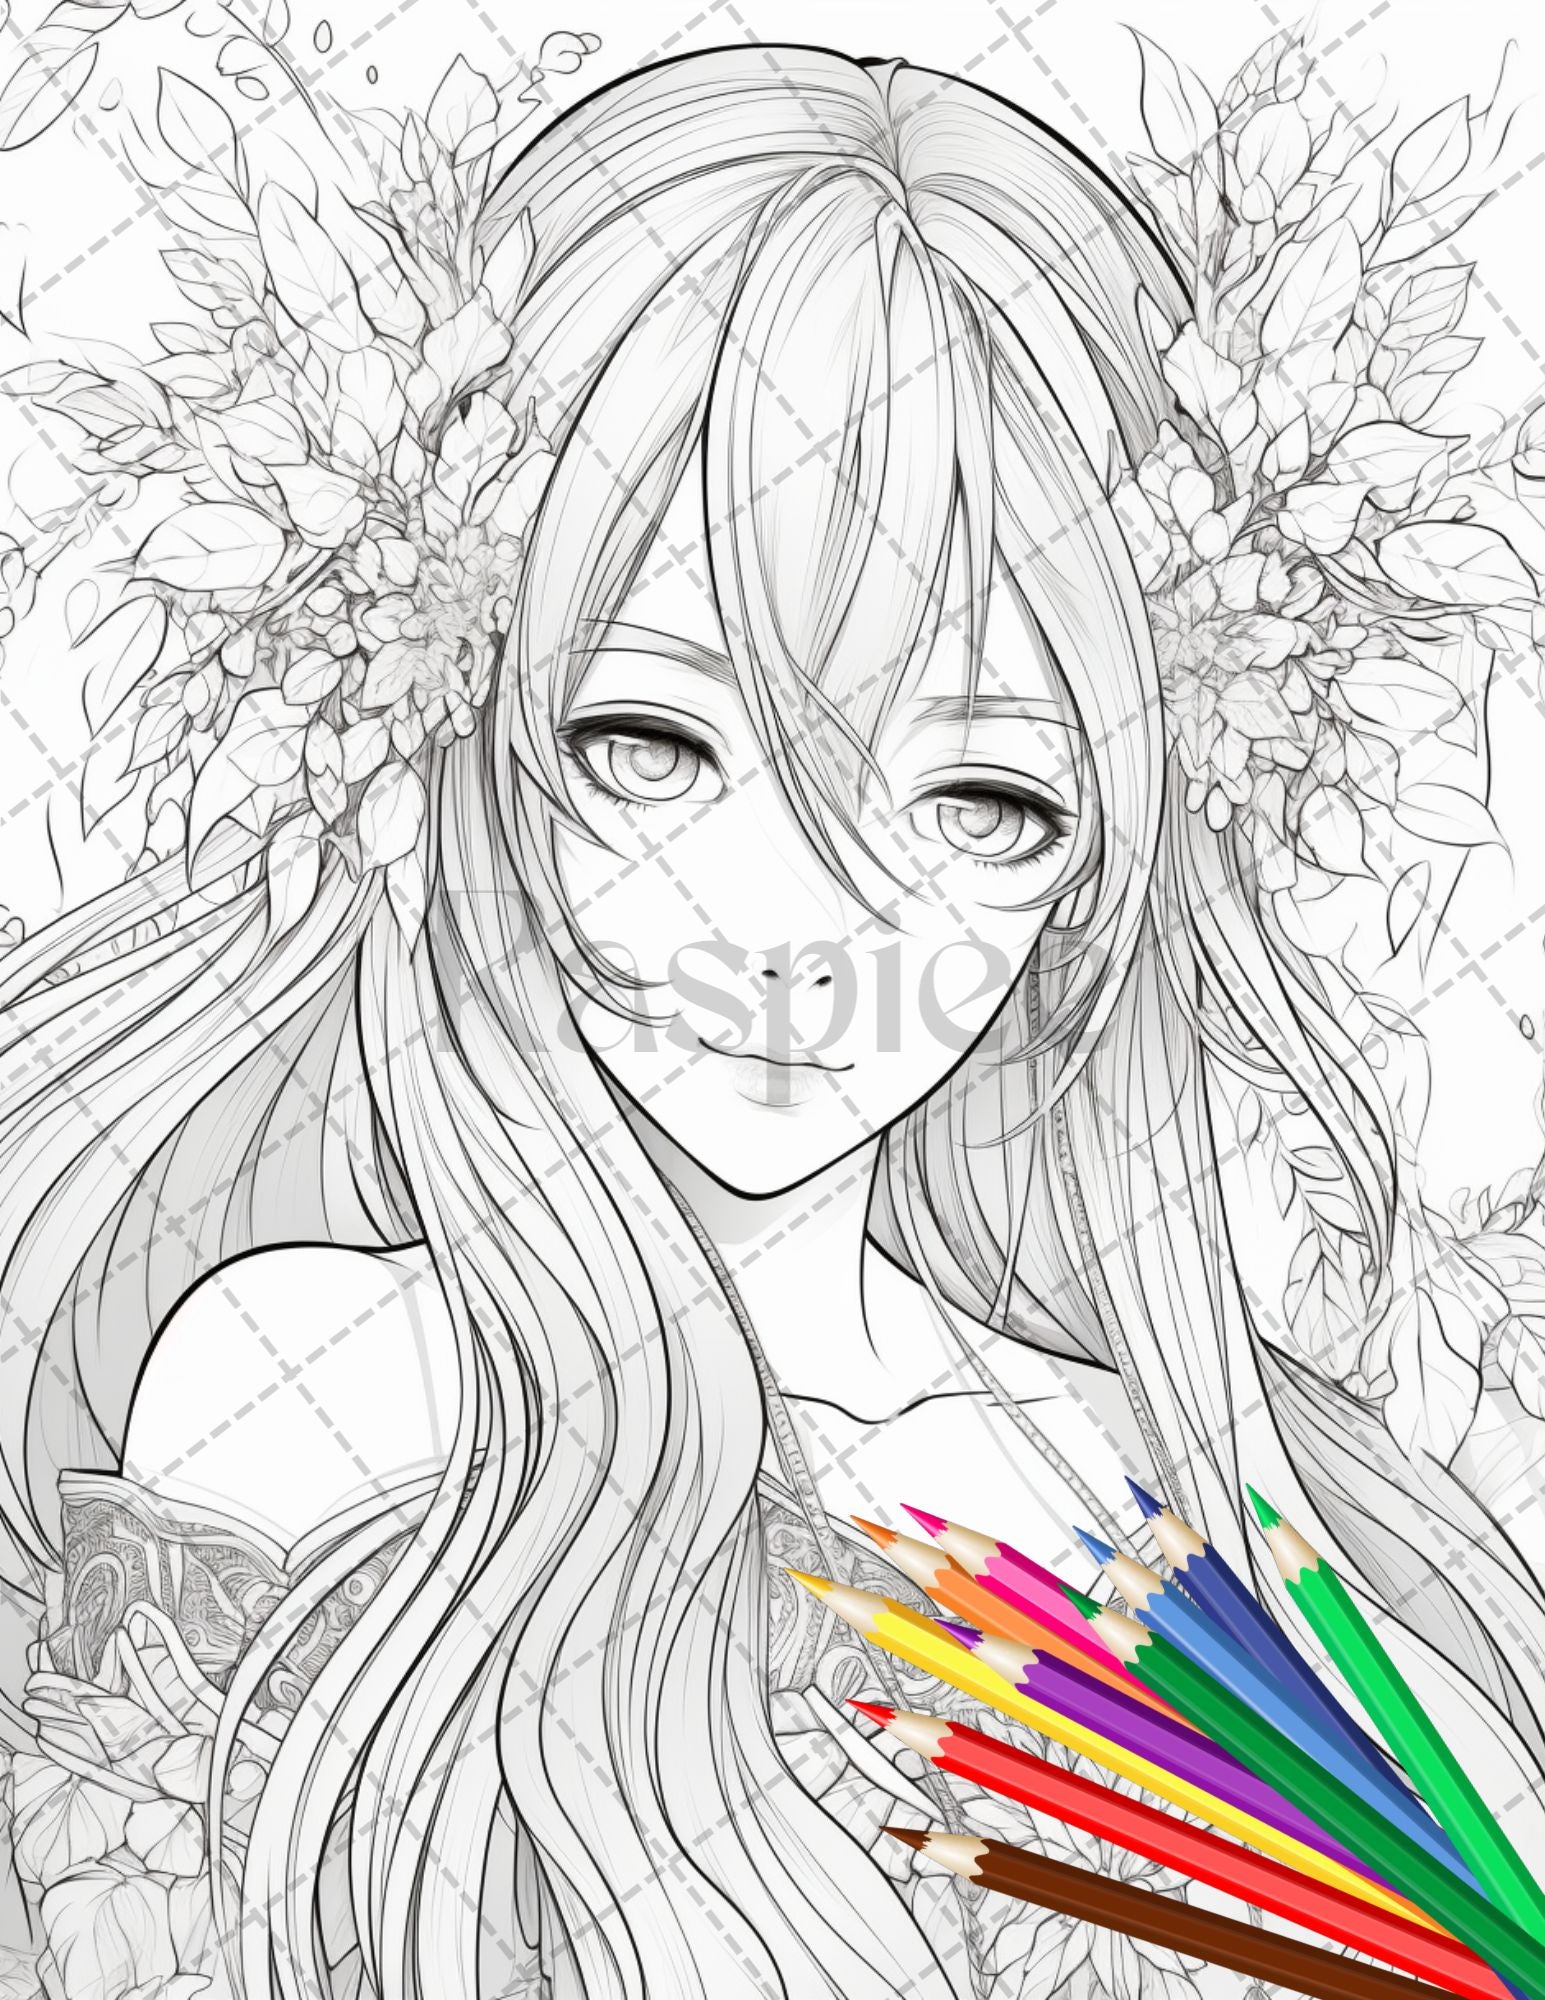 30 Jungle Fairy Girls Coloring Pages 30 Coloring Ideas Printable Greyscale Anime  Coloring Book for Adults Kids Digital Download PDF 